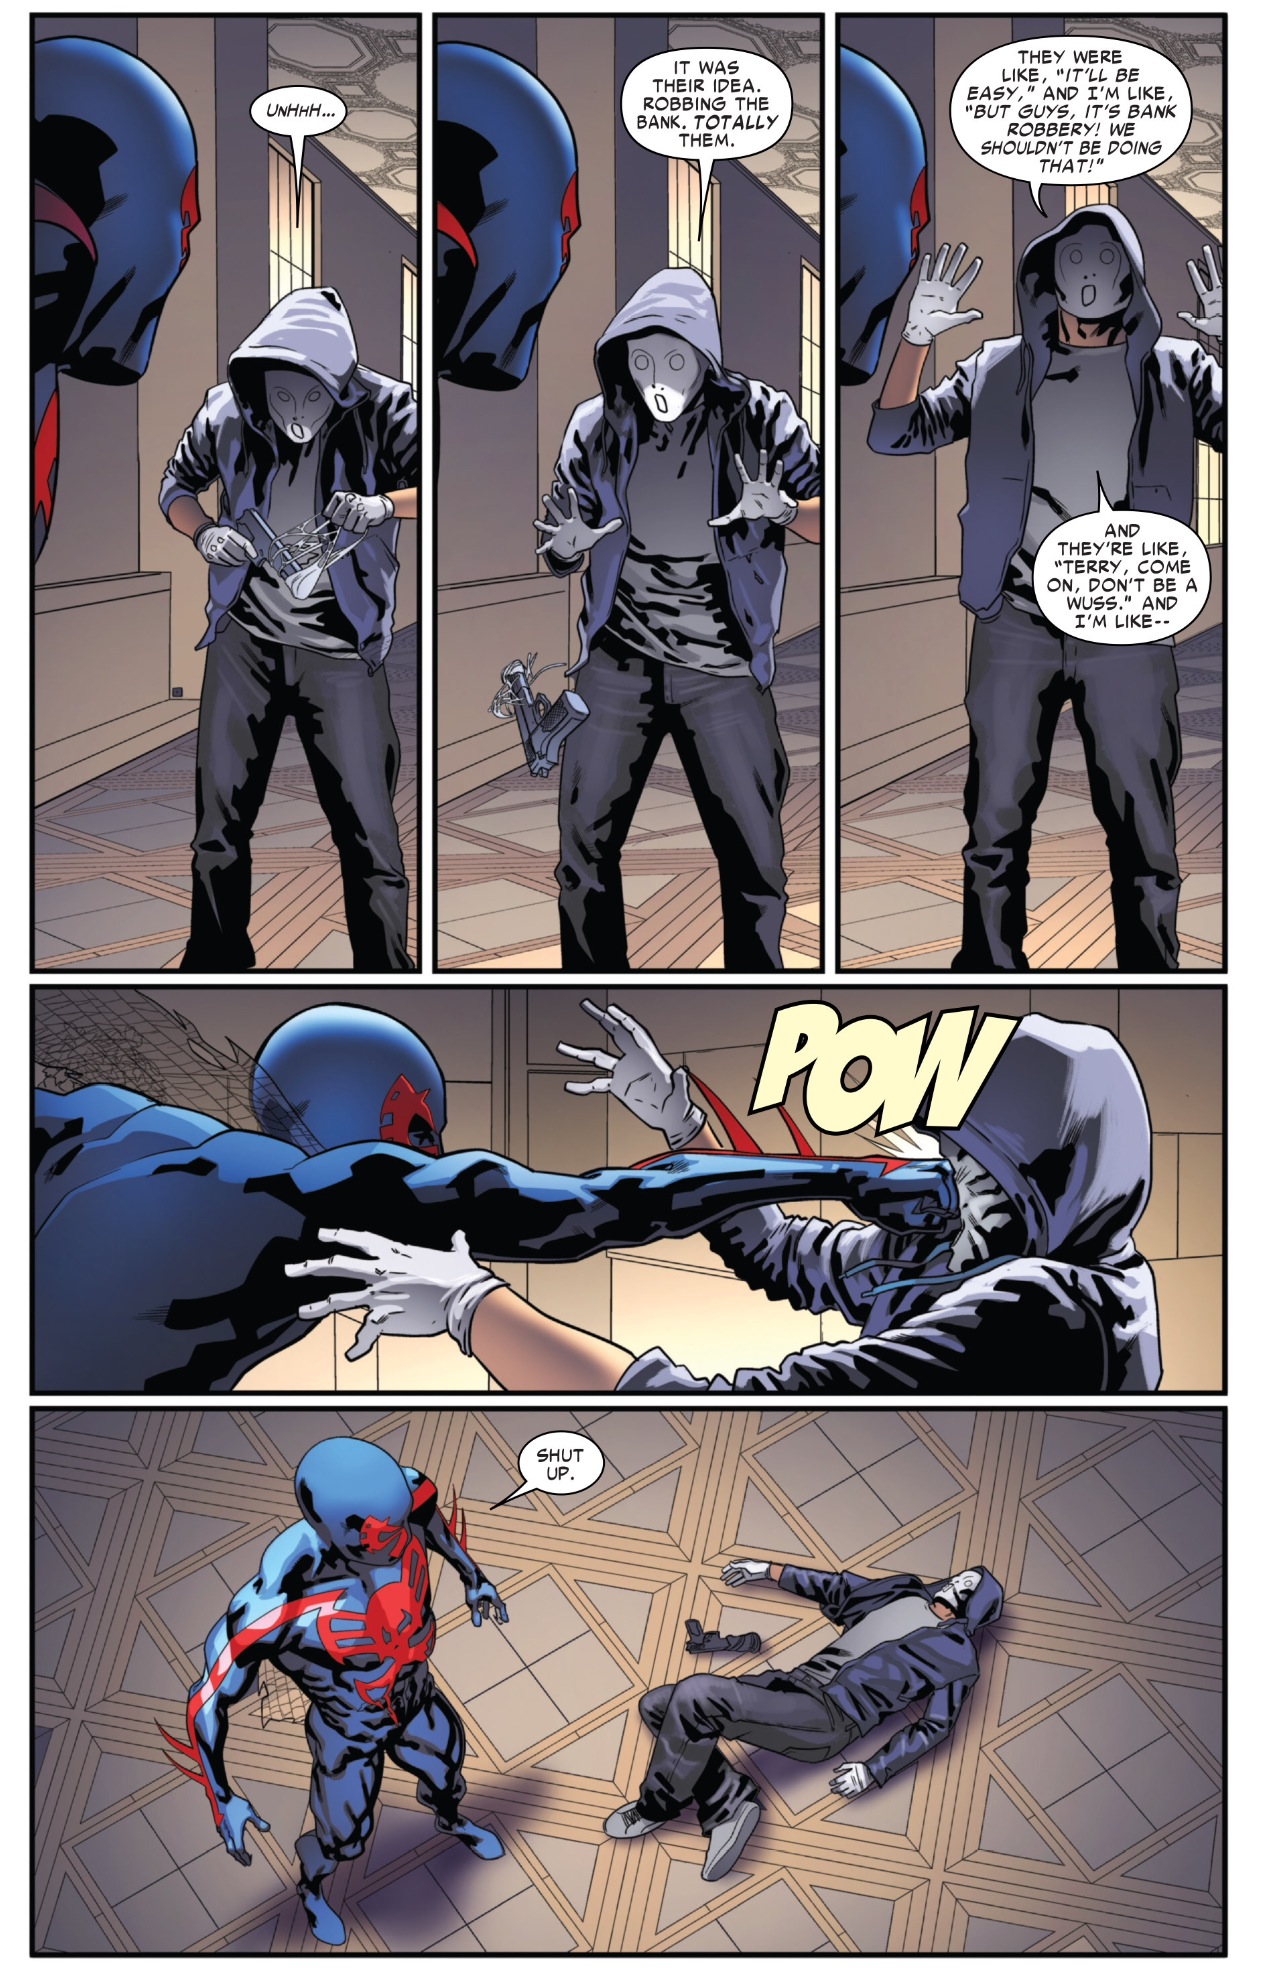 Spider-Man 2099 #2 and Being Funny